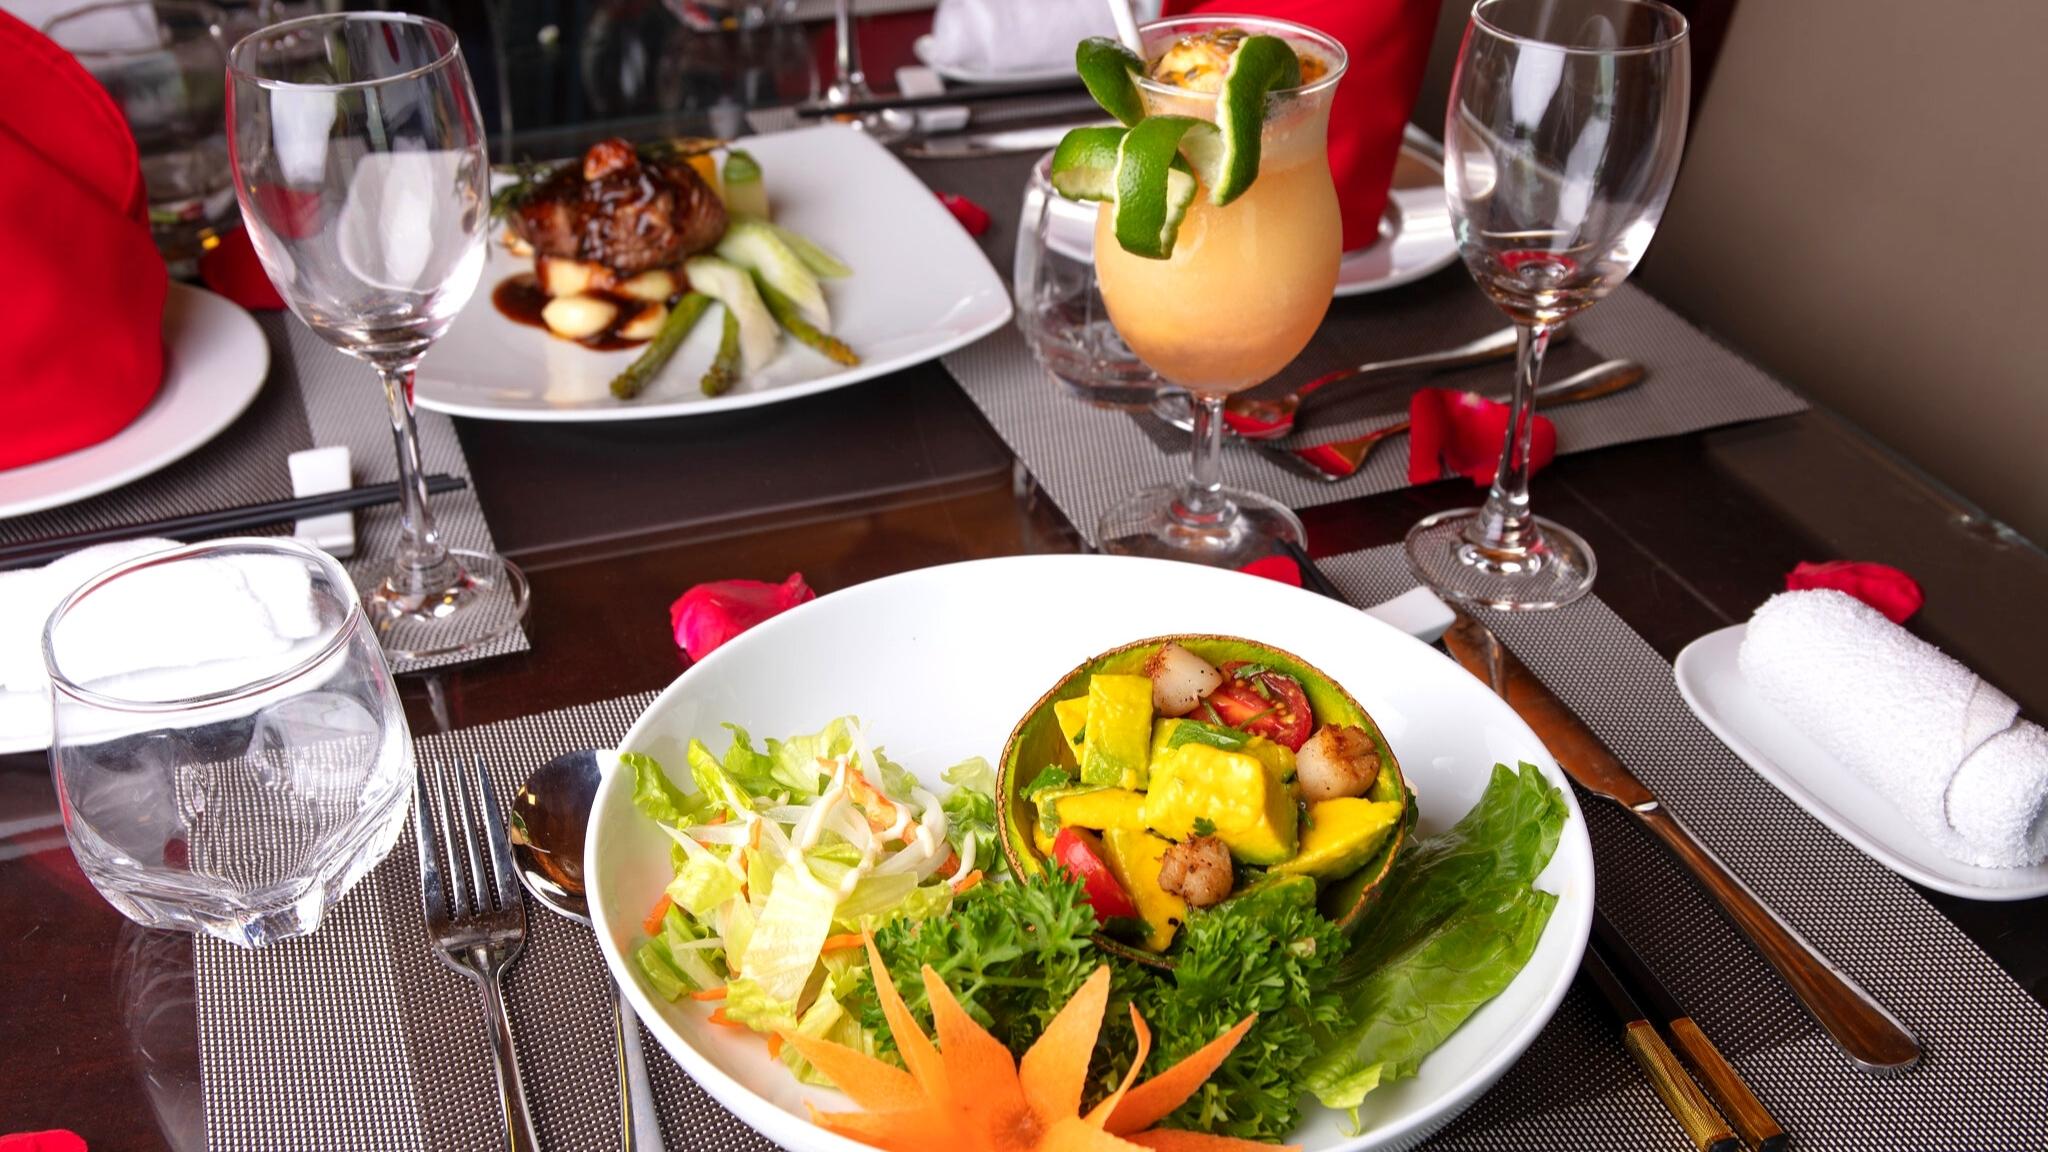 Have a deluxe meal with delicious and fresh food on board